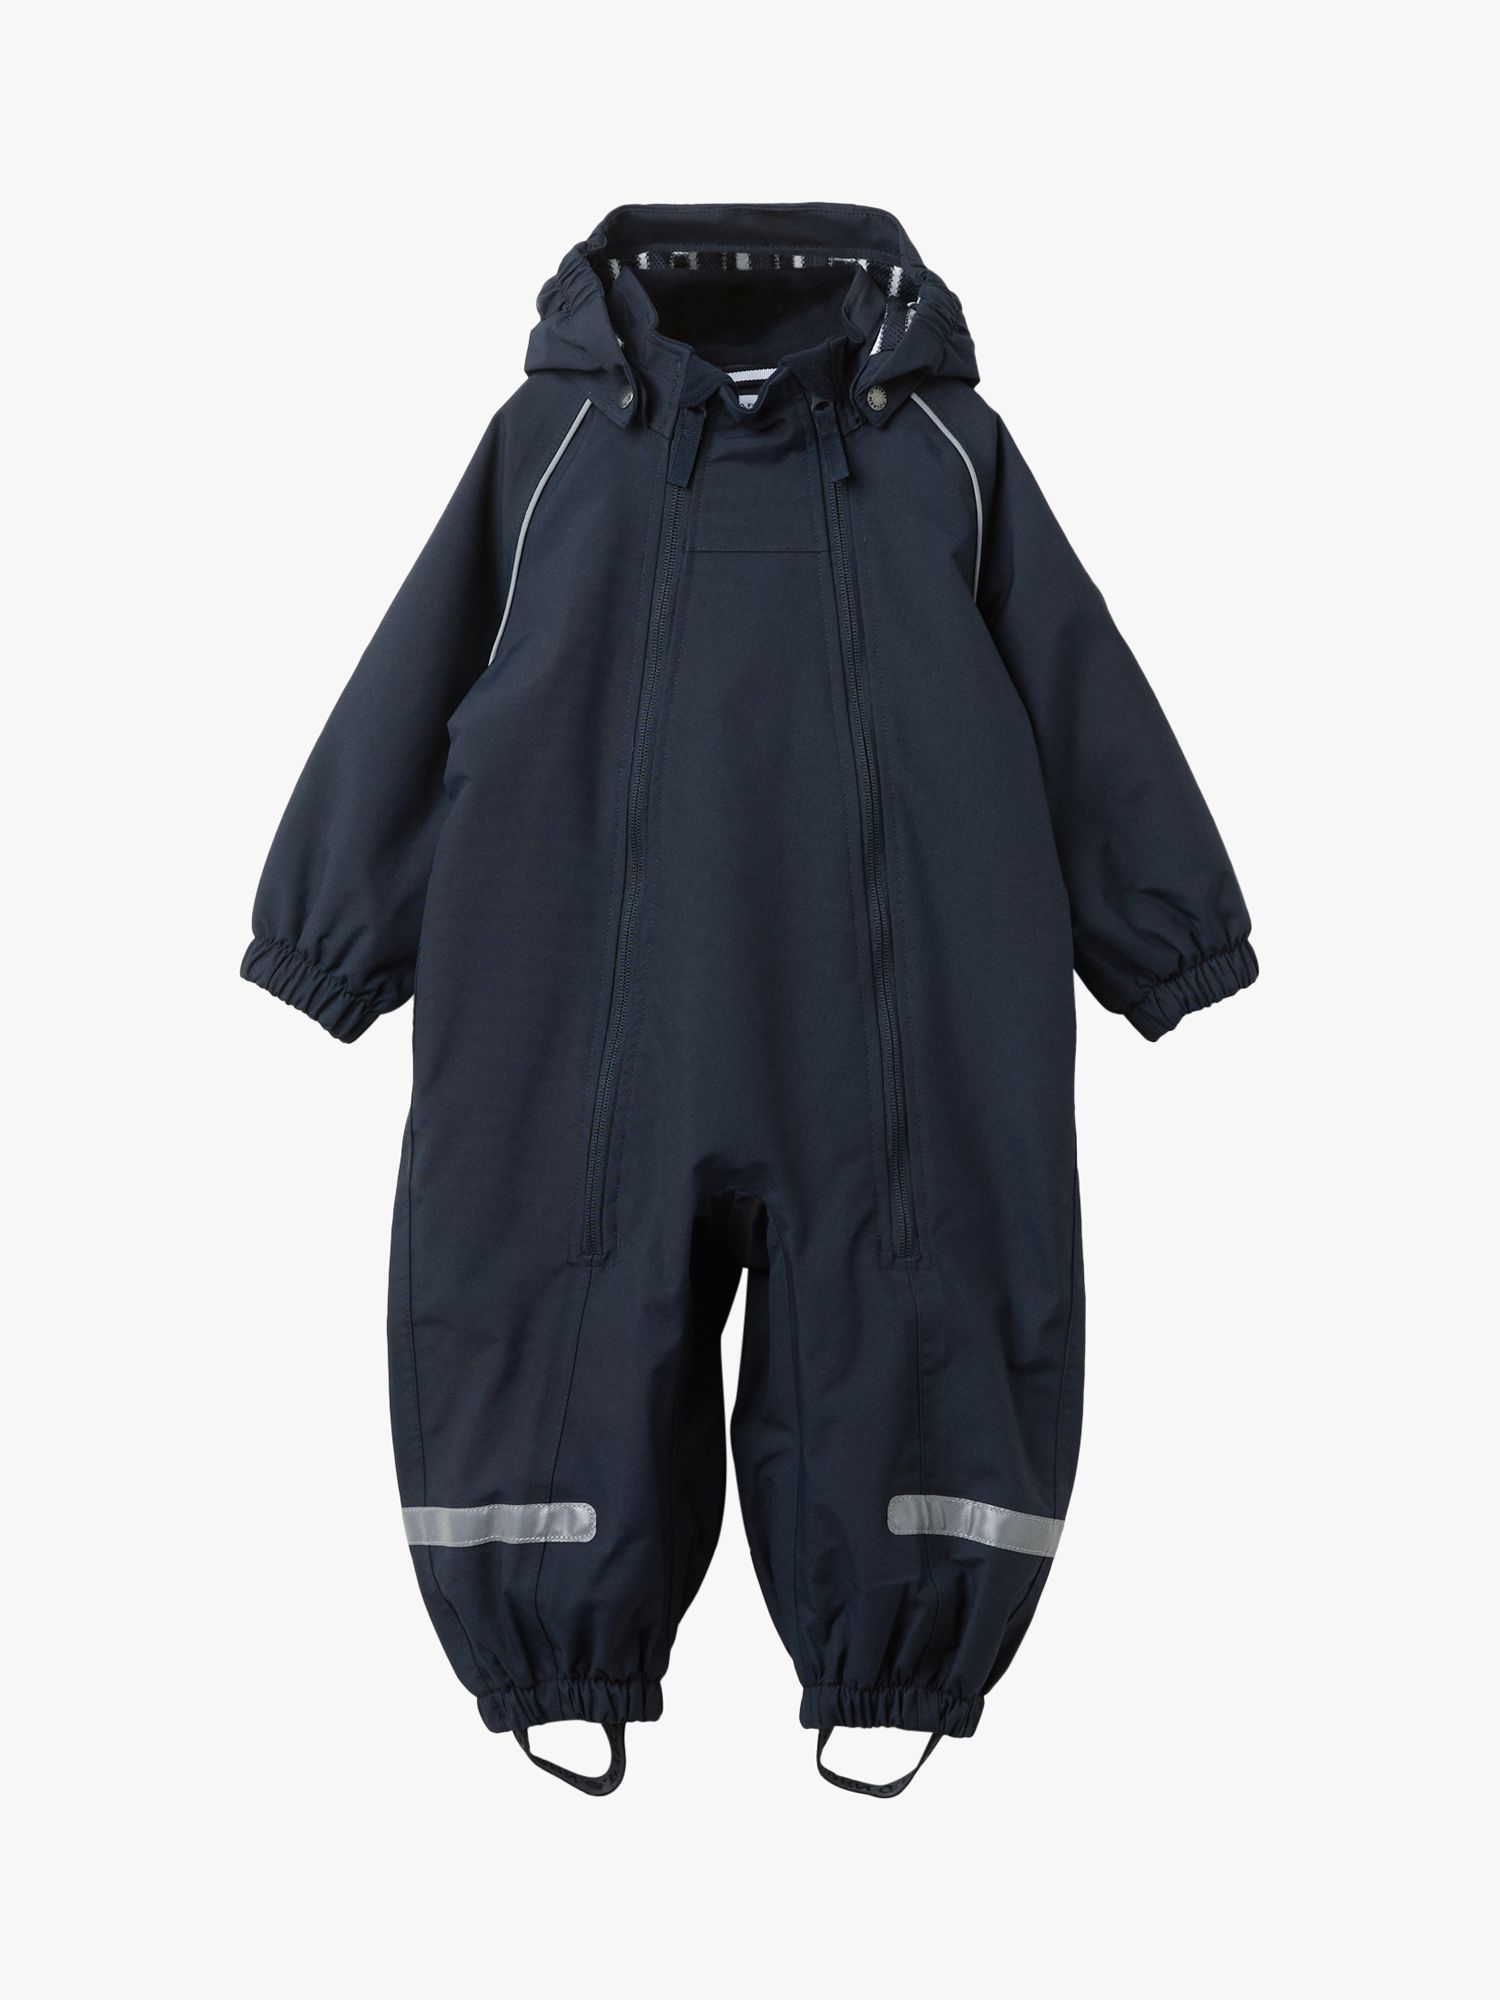 Buy Polarn O. Pyret Baby Shell Overall, Navy Online at johnlewis.com